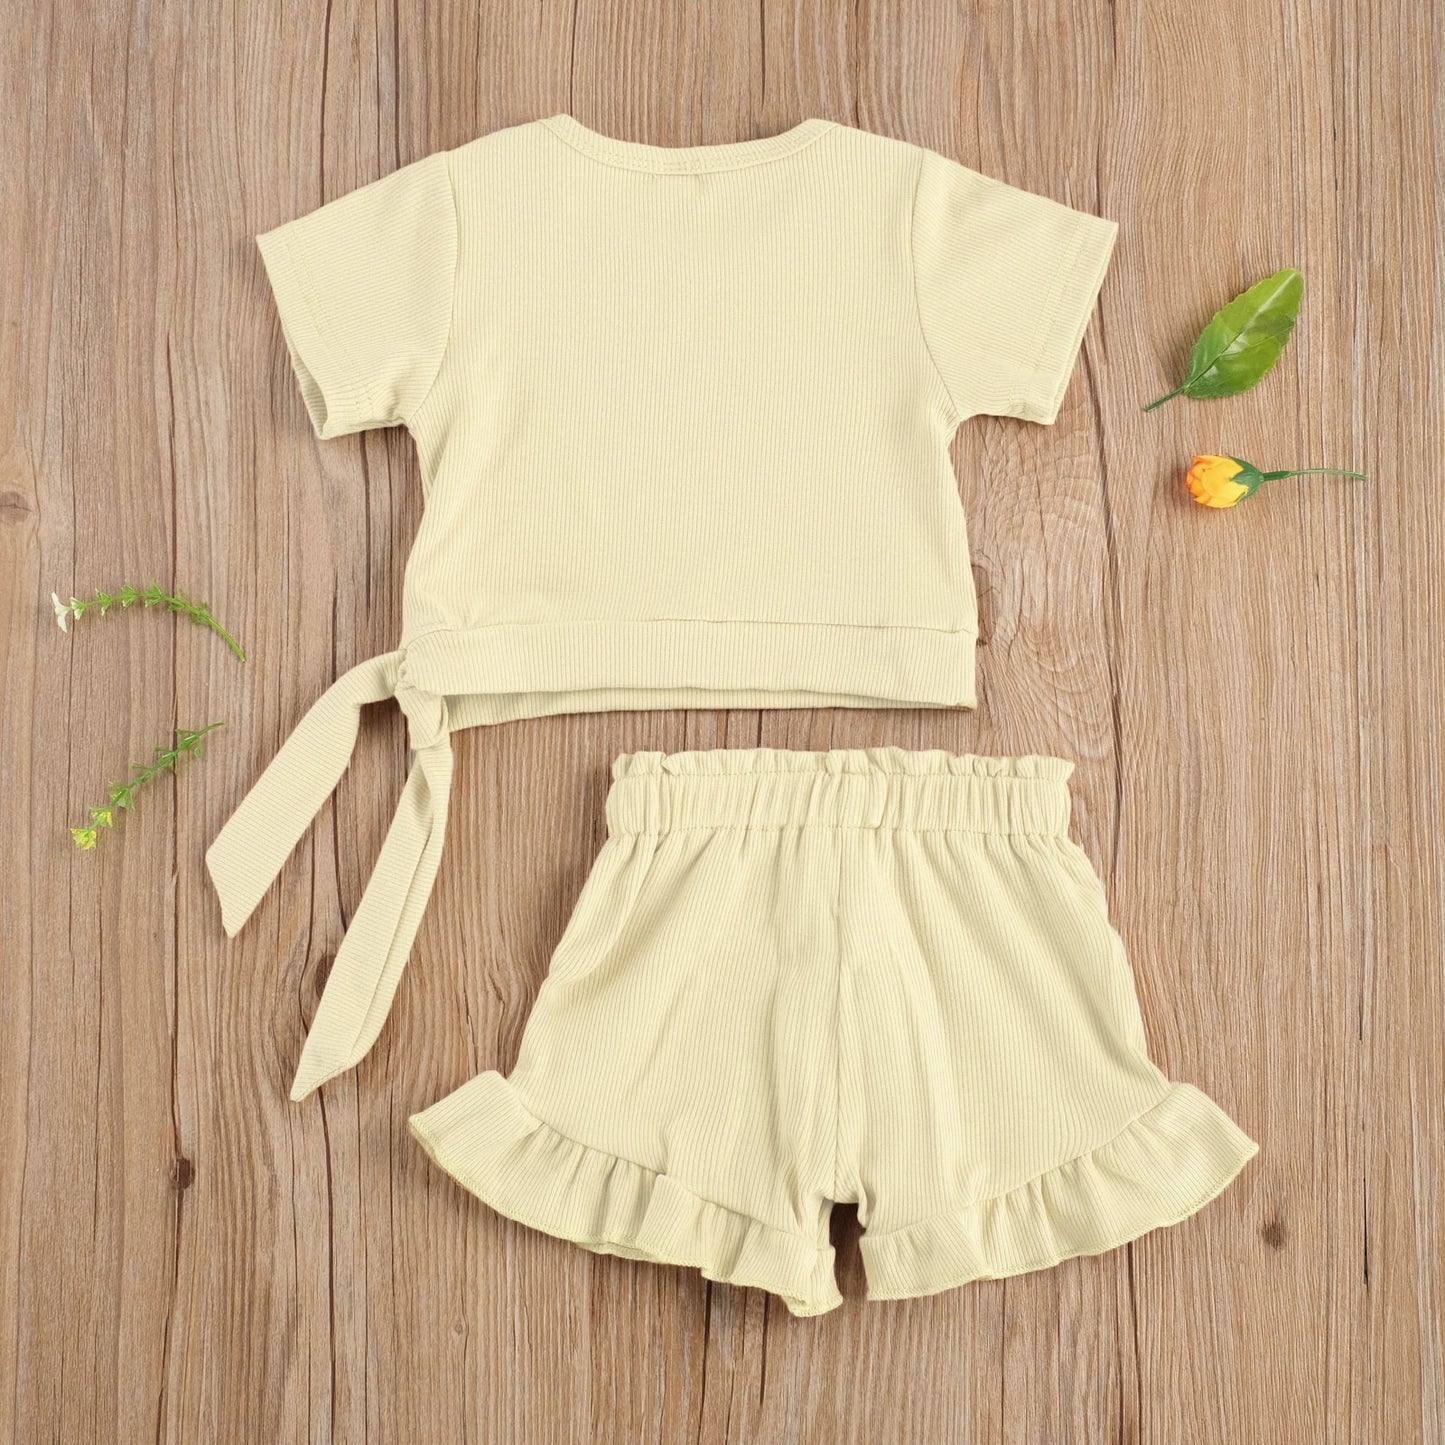 2 Piece Side Tie Shirt and Ruffle Shorts